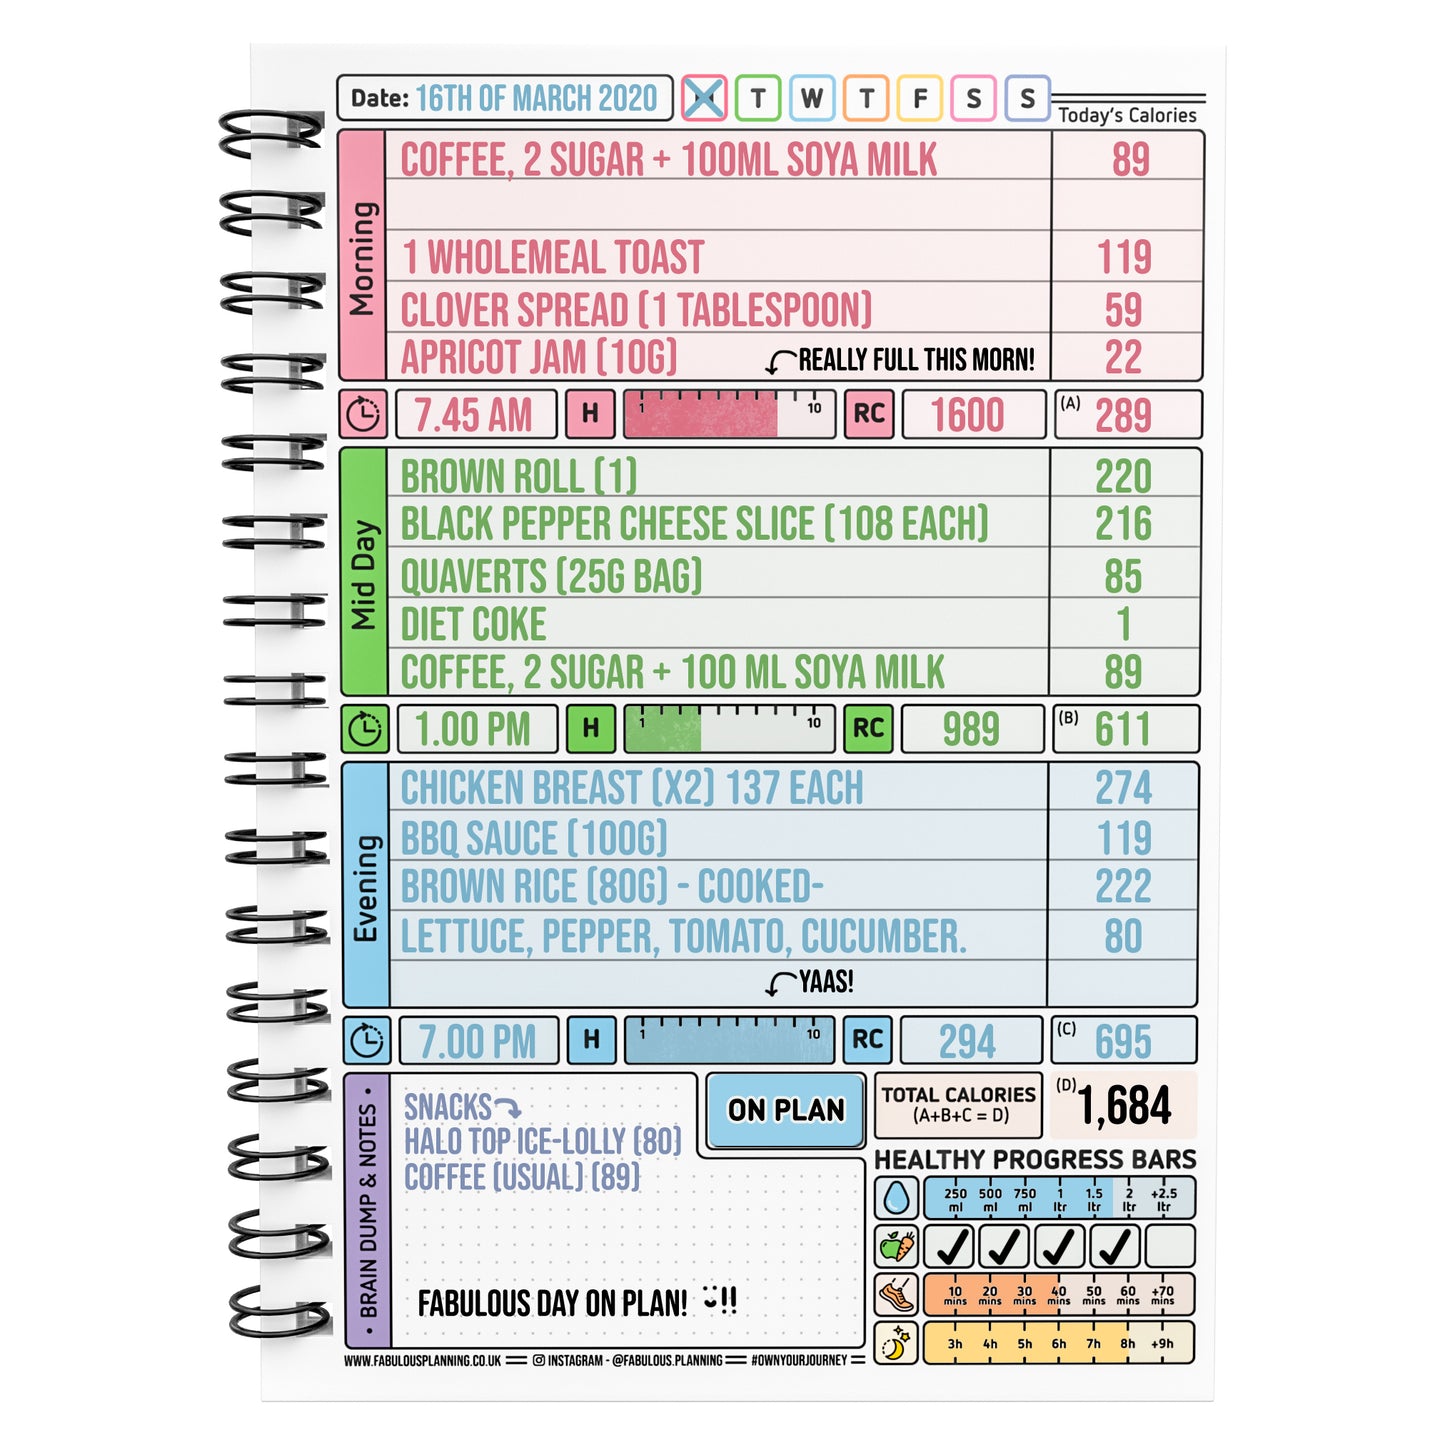 Food Diary - C4 - Calorie Counting